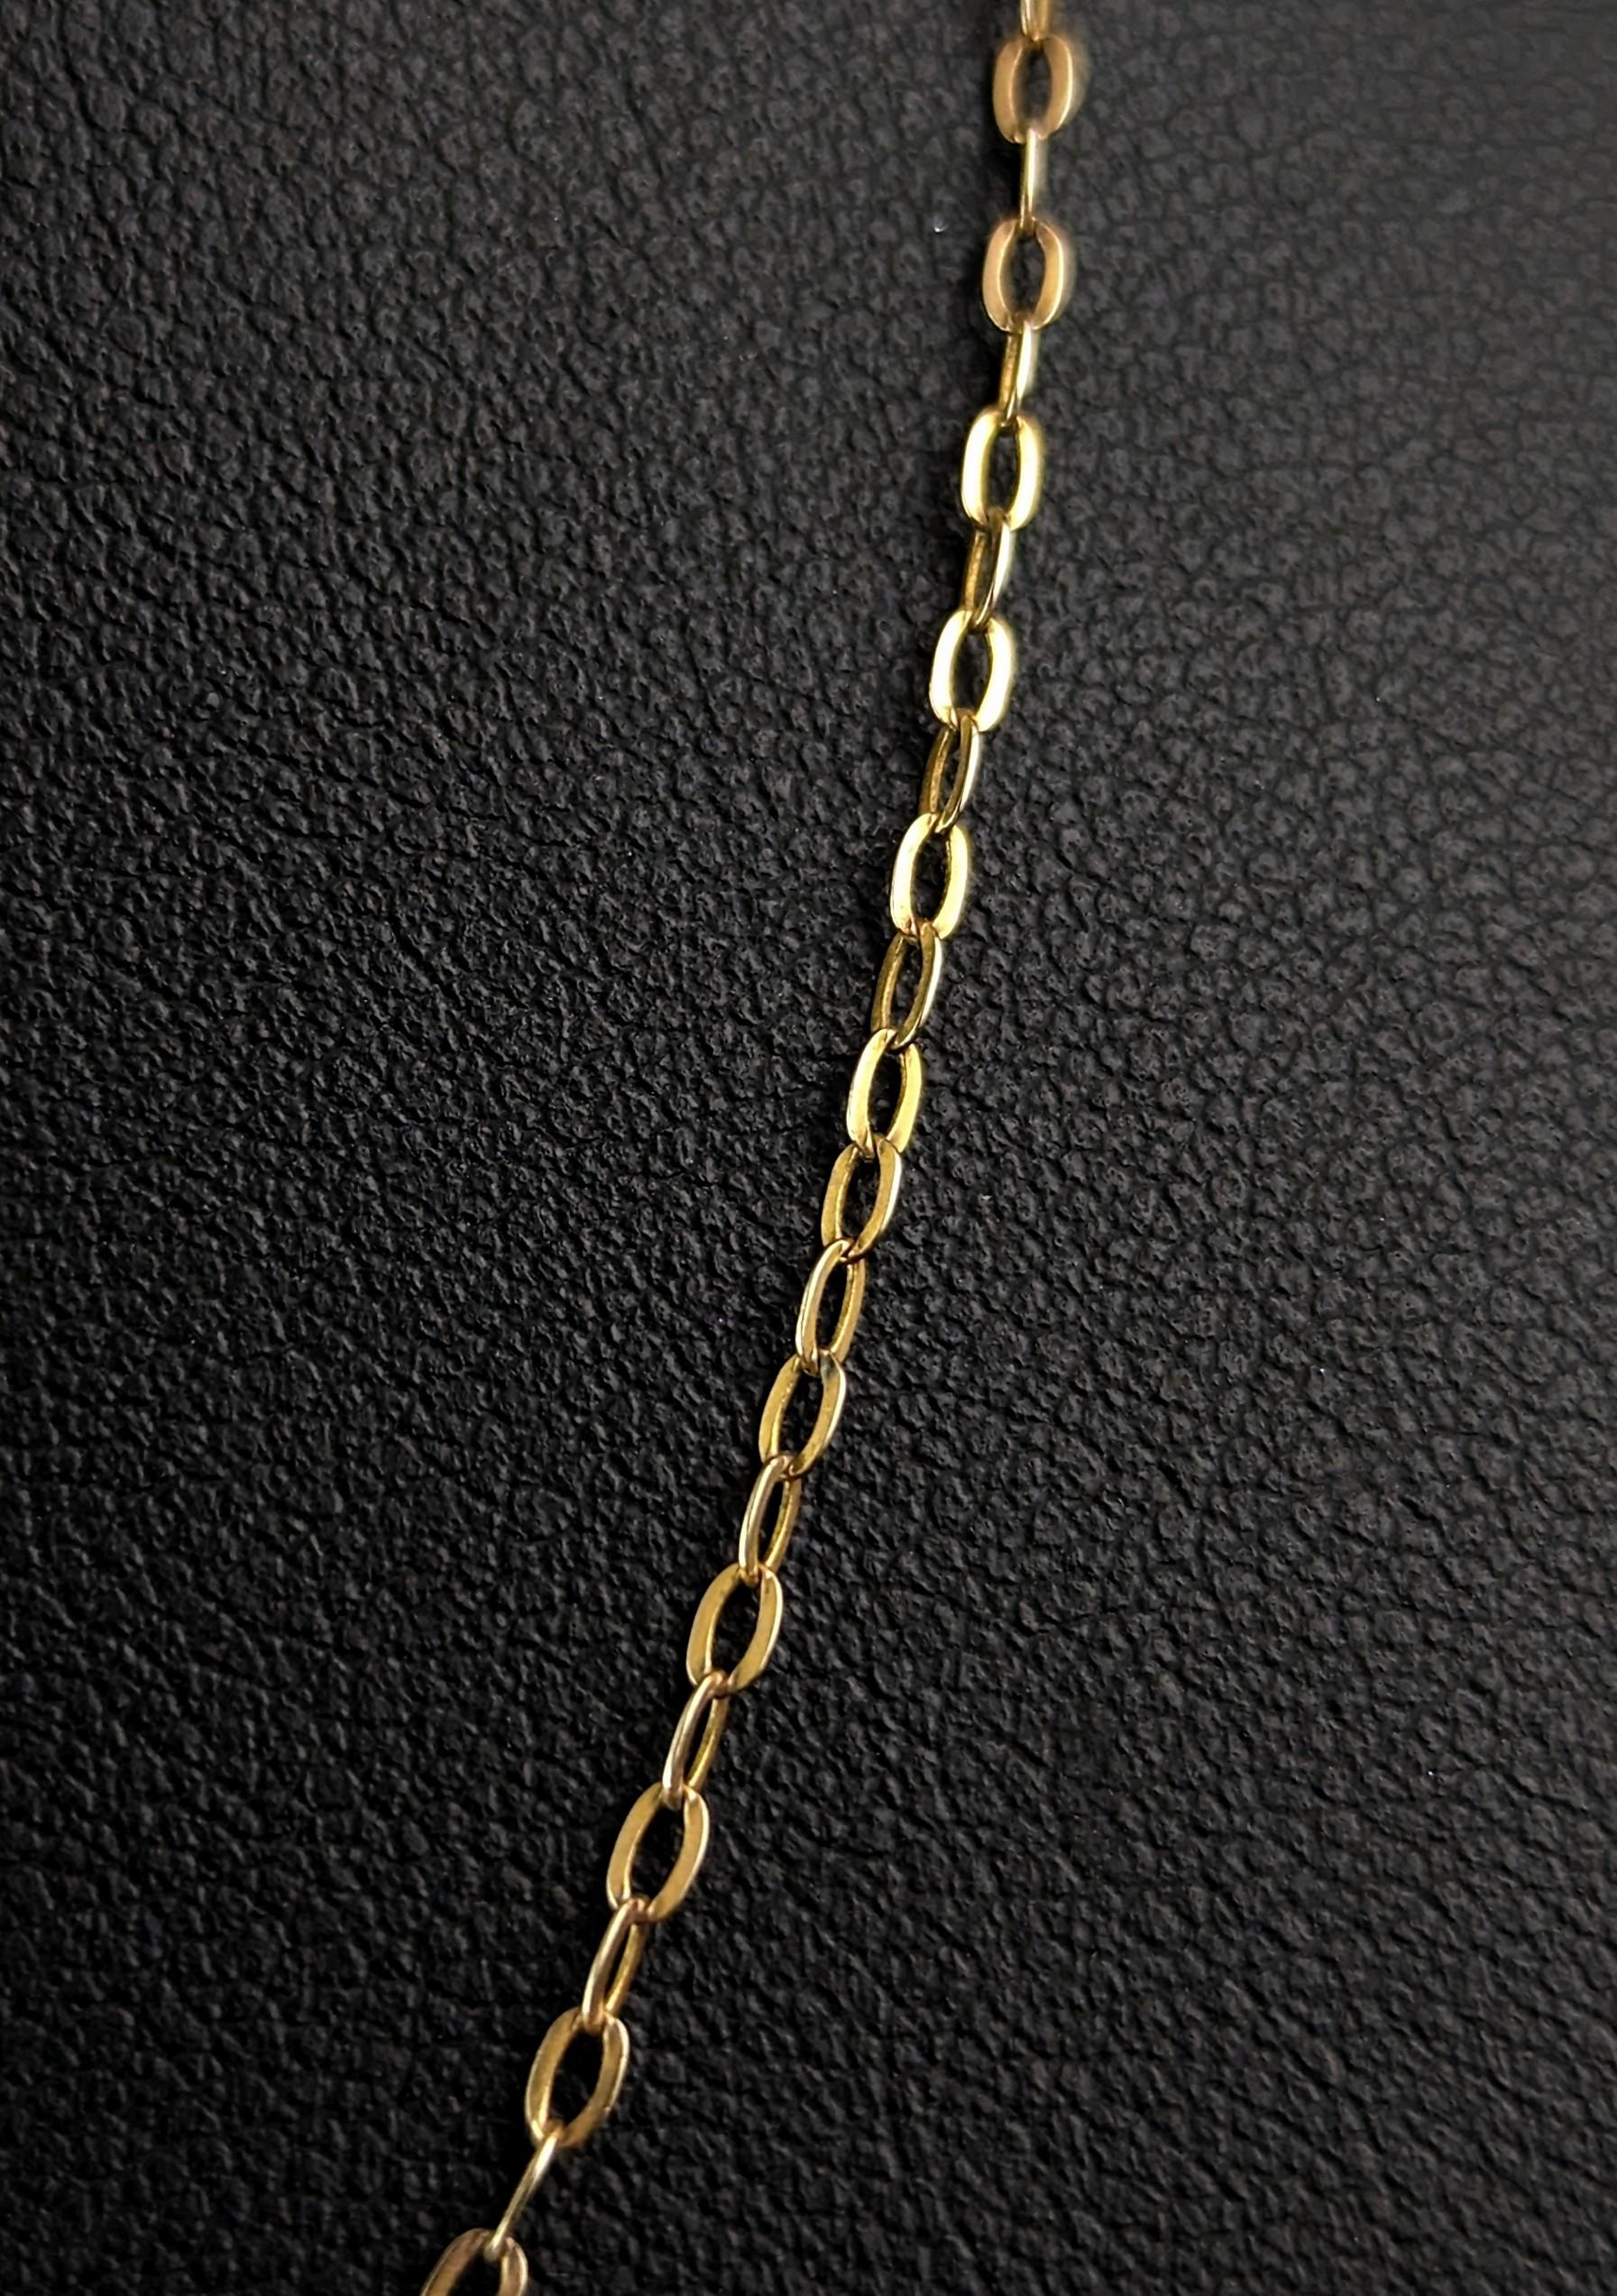 Antique 9k yellow gold trace chain necklace, dainty  6